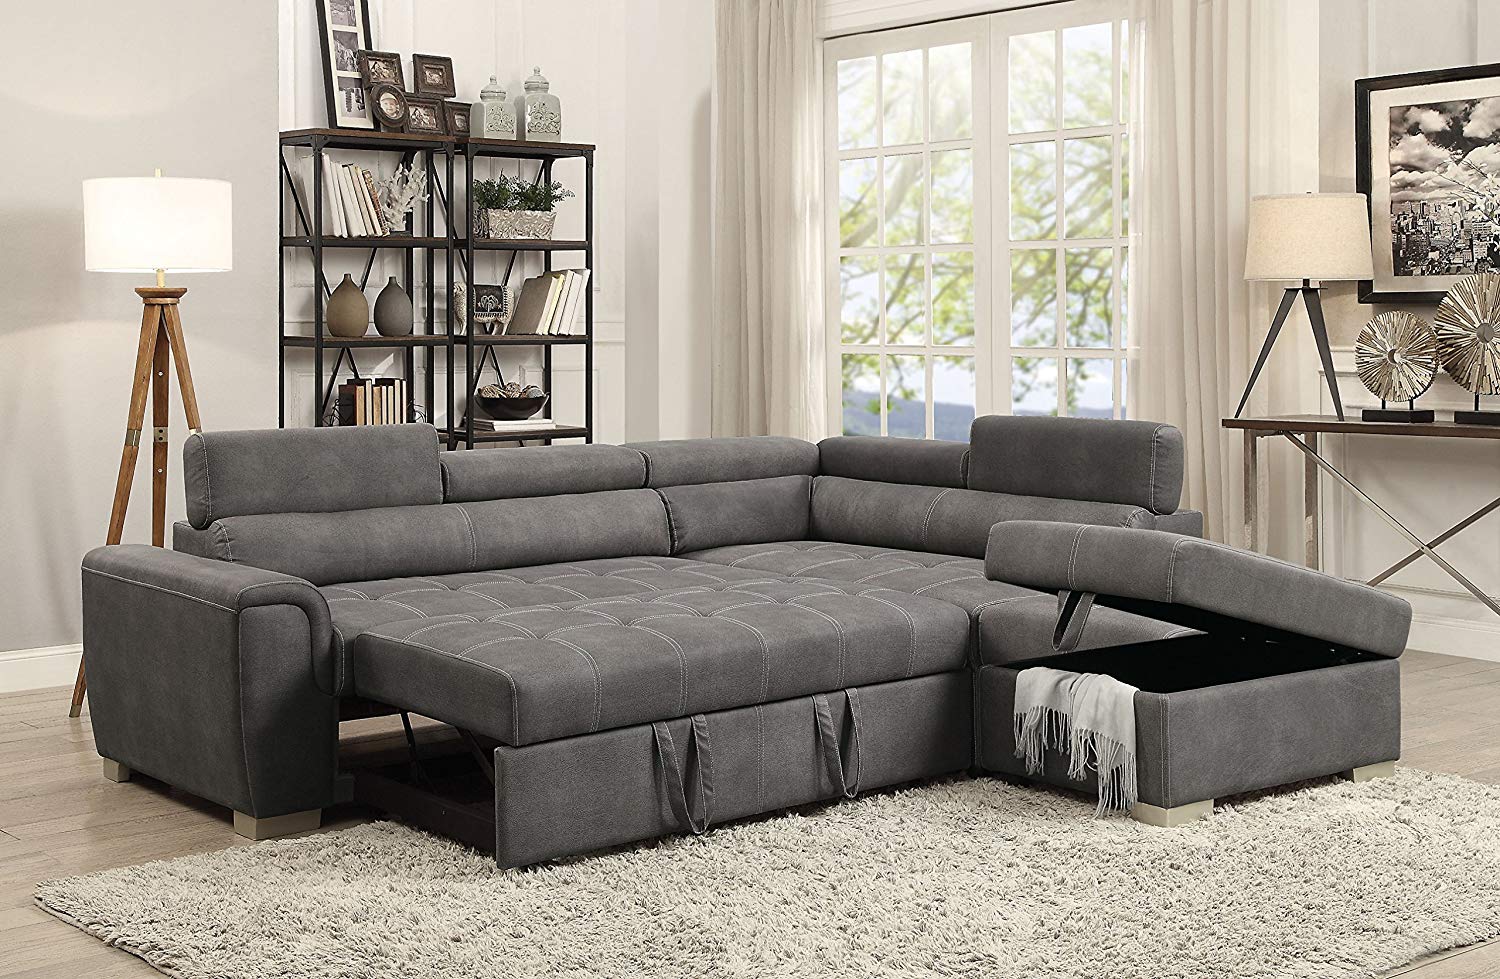 ACME Thelma Sectional Sleeper Sofa and Ottoman in Gray Polished Microfiber - image 4 of 5